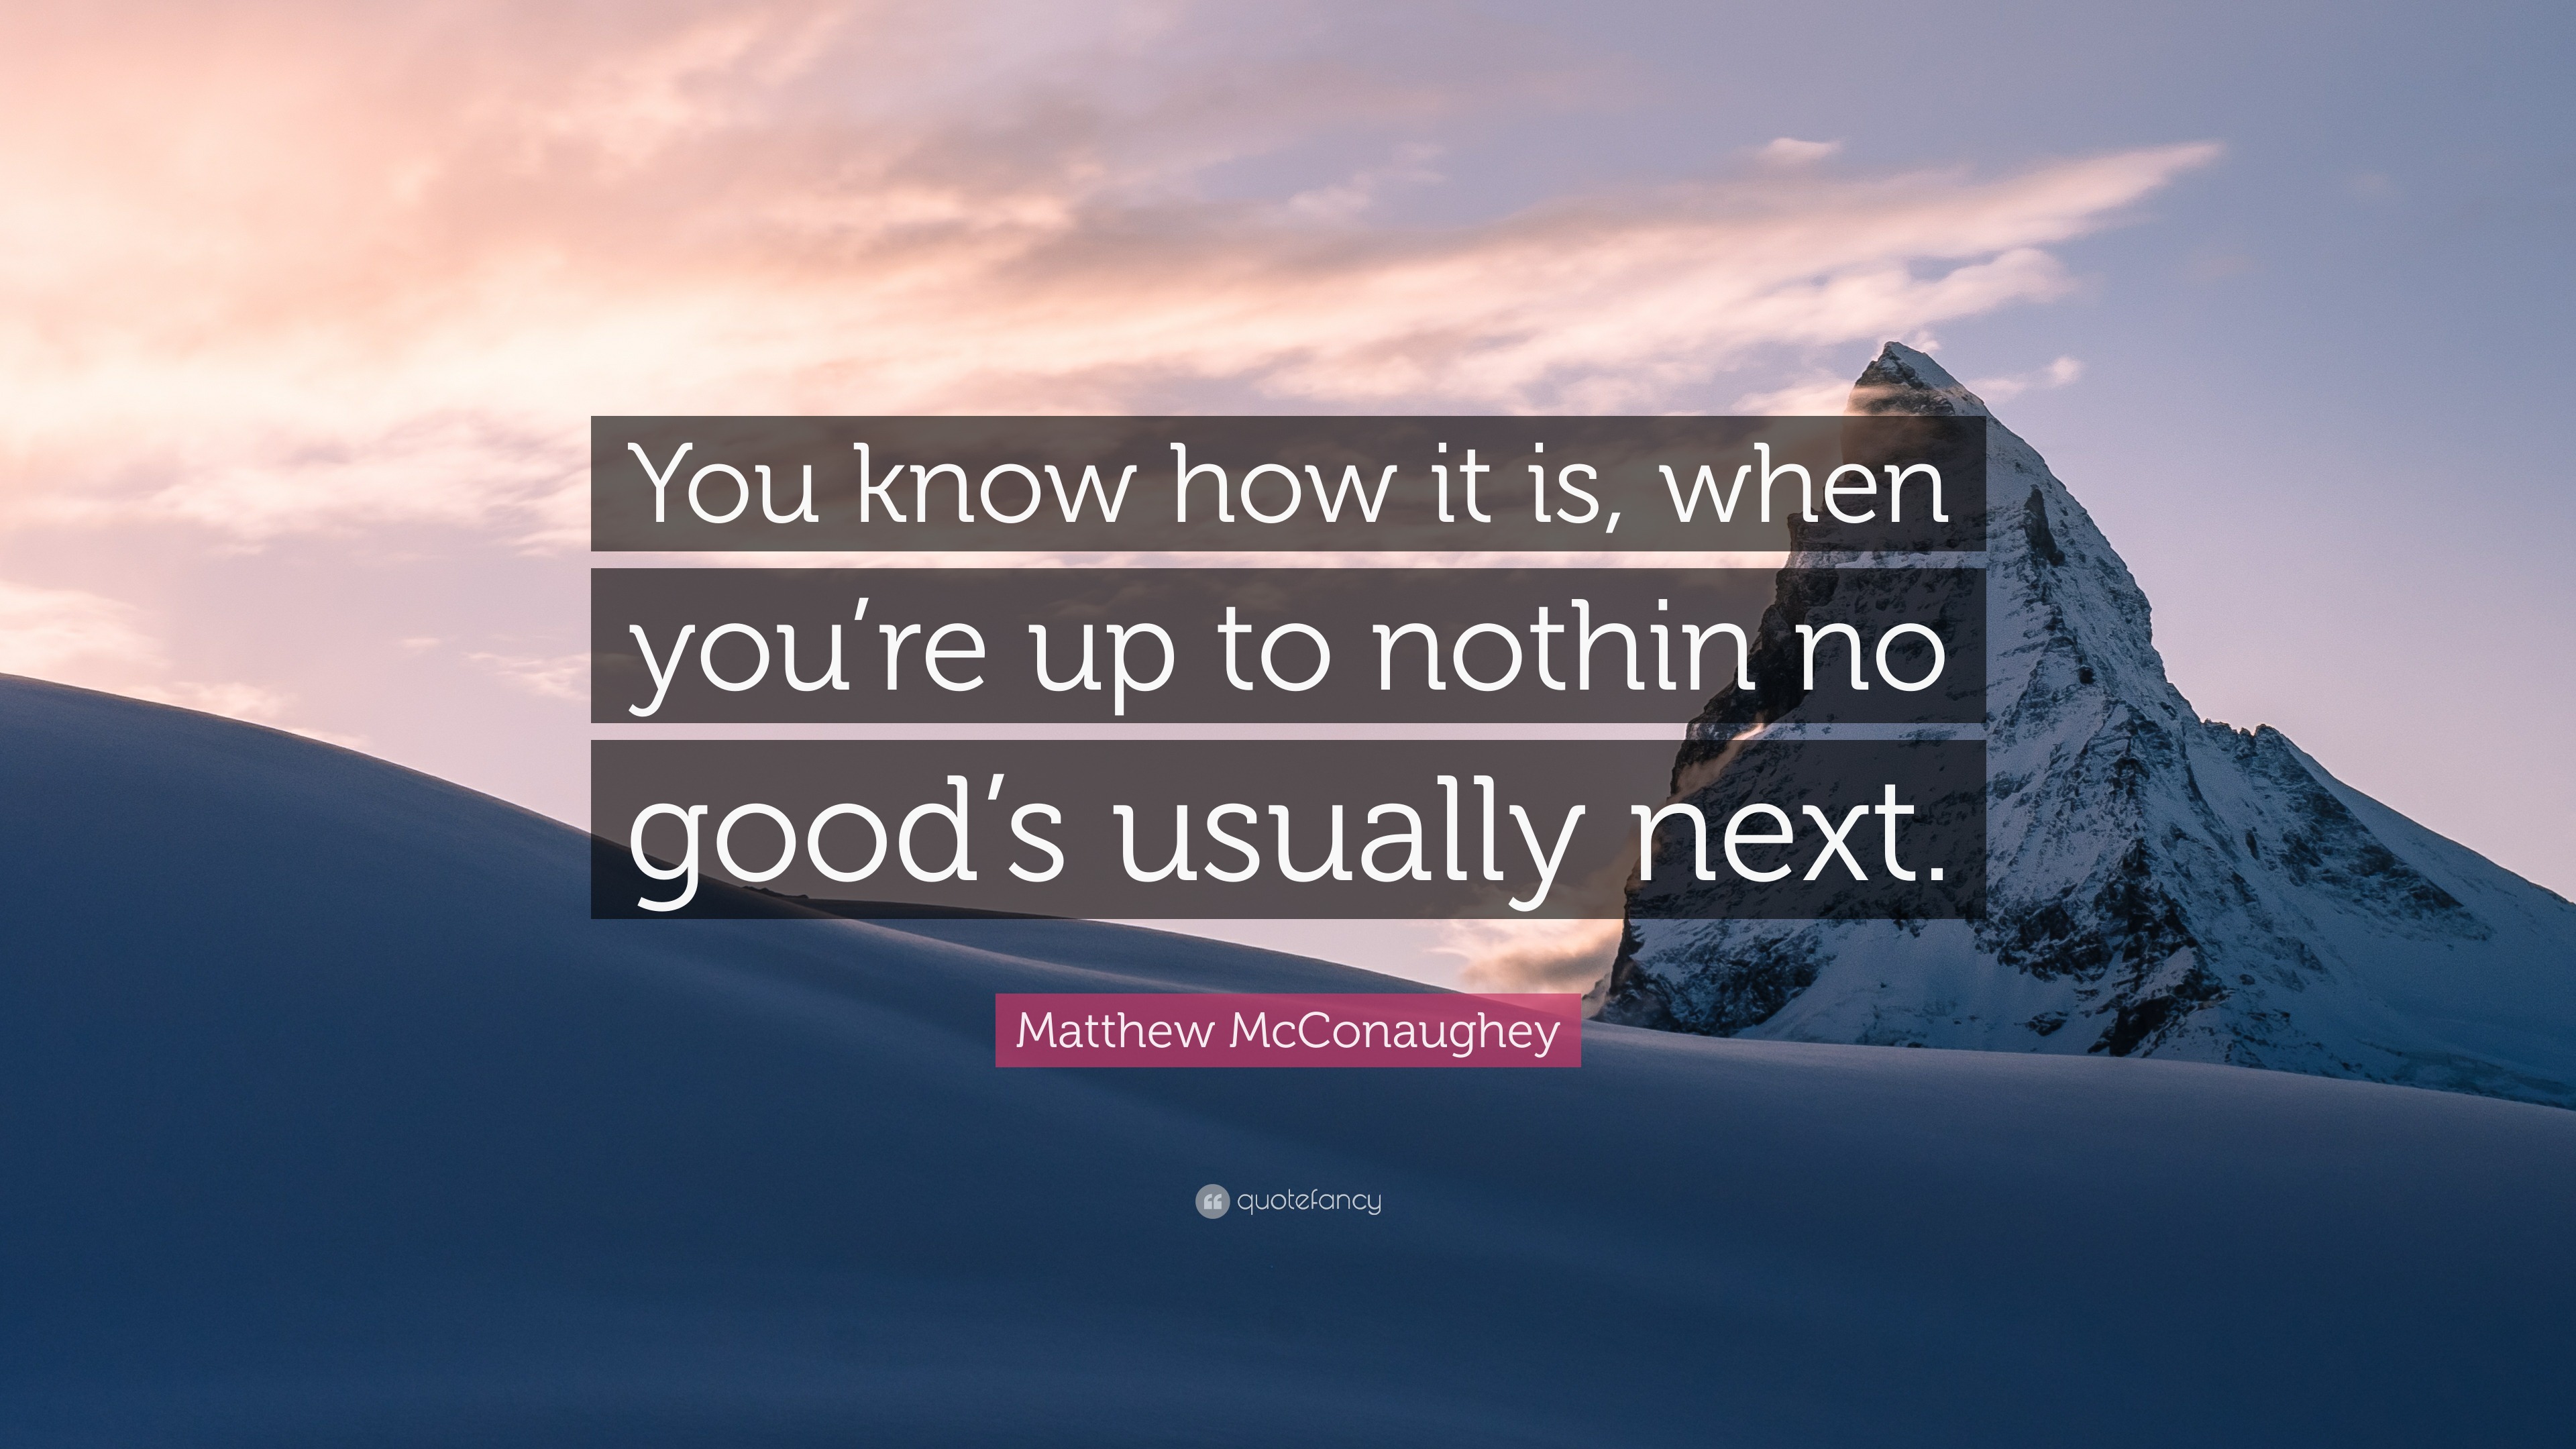 Matthew McConaughey Quote: “You know how it is, when you’re up to ...